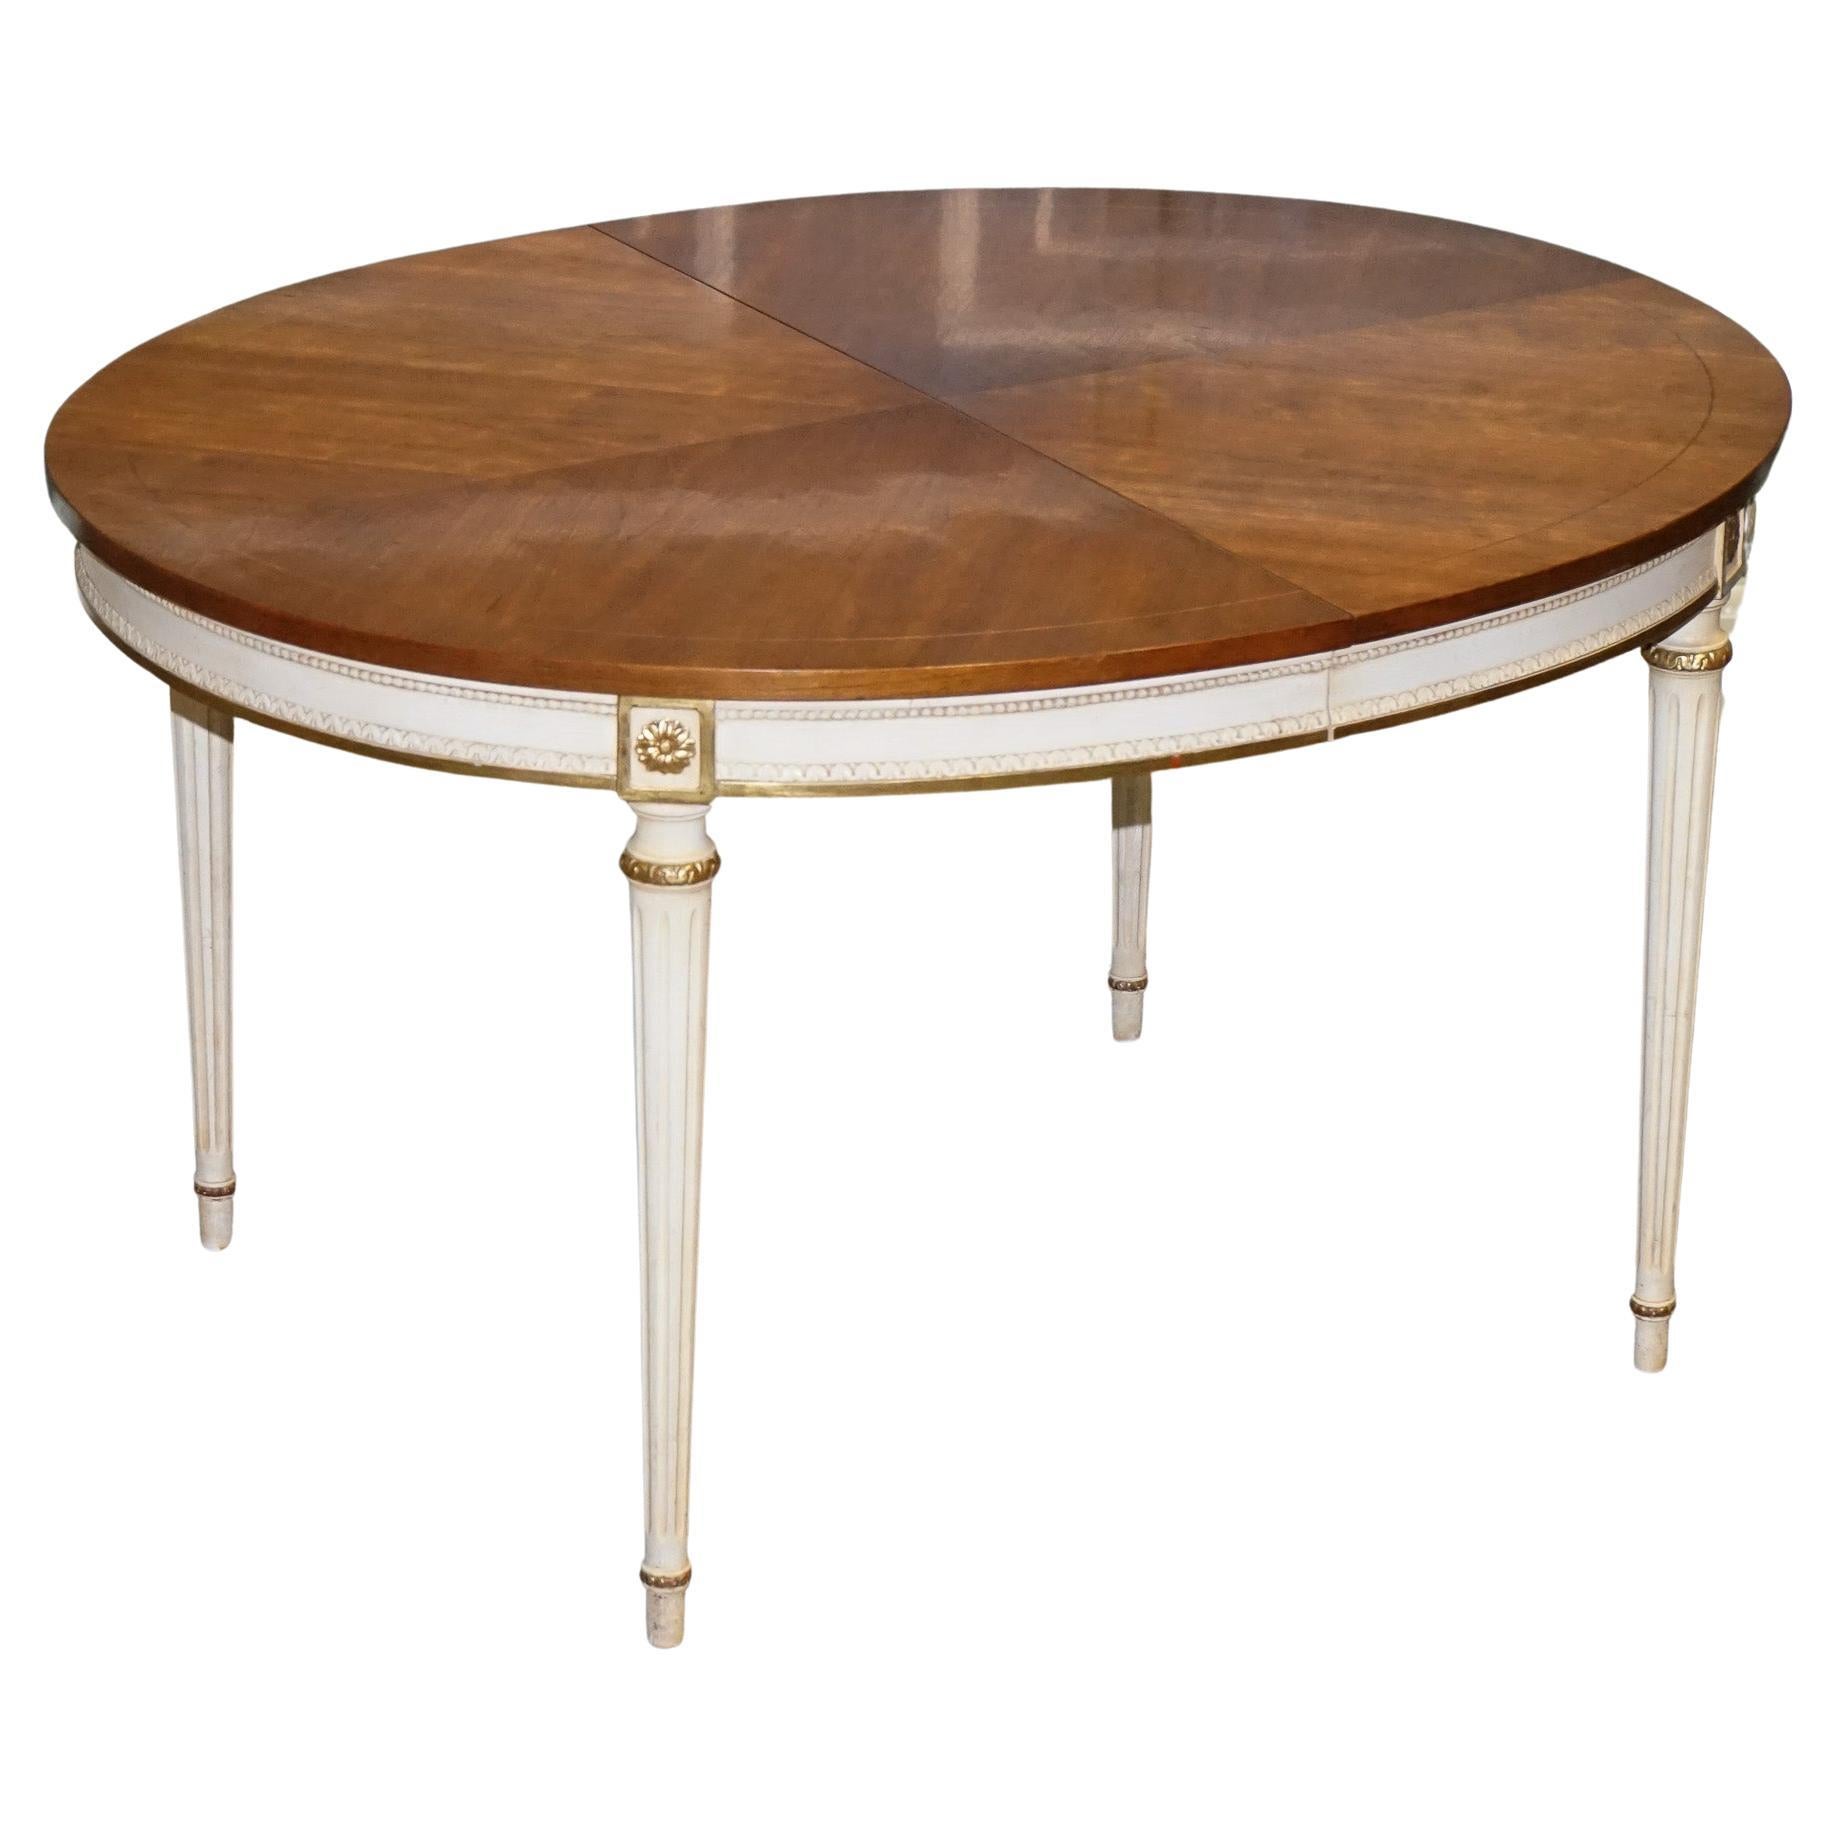 Kindel Furniture Cherrywood & Hand Painted Giltwood Extendable Dining Table For Sale